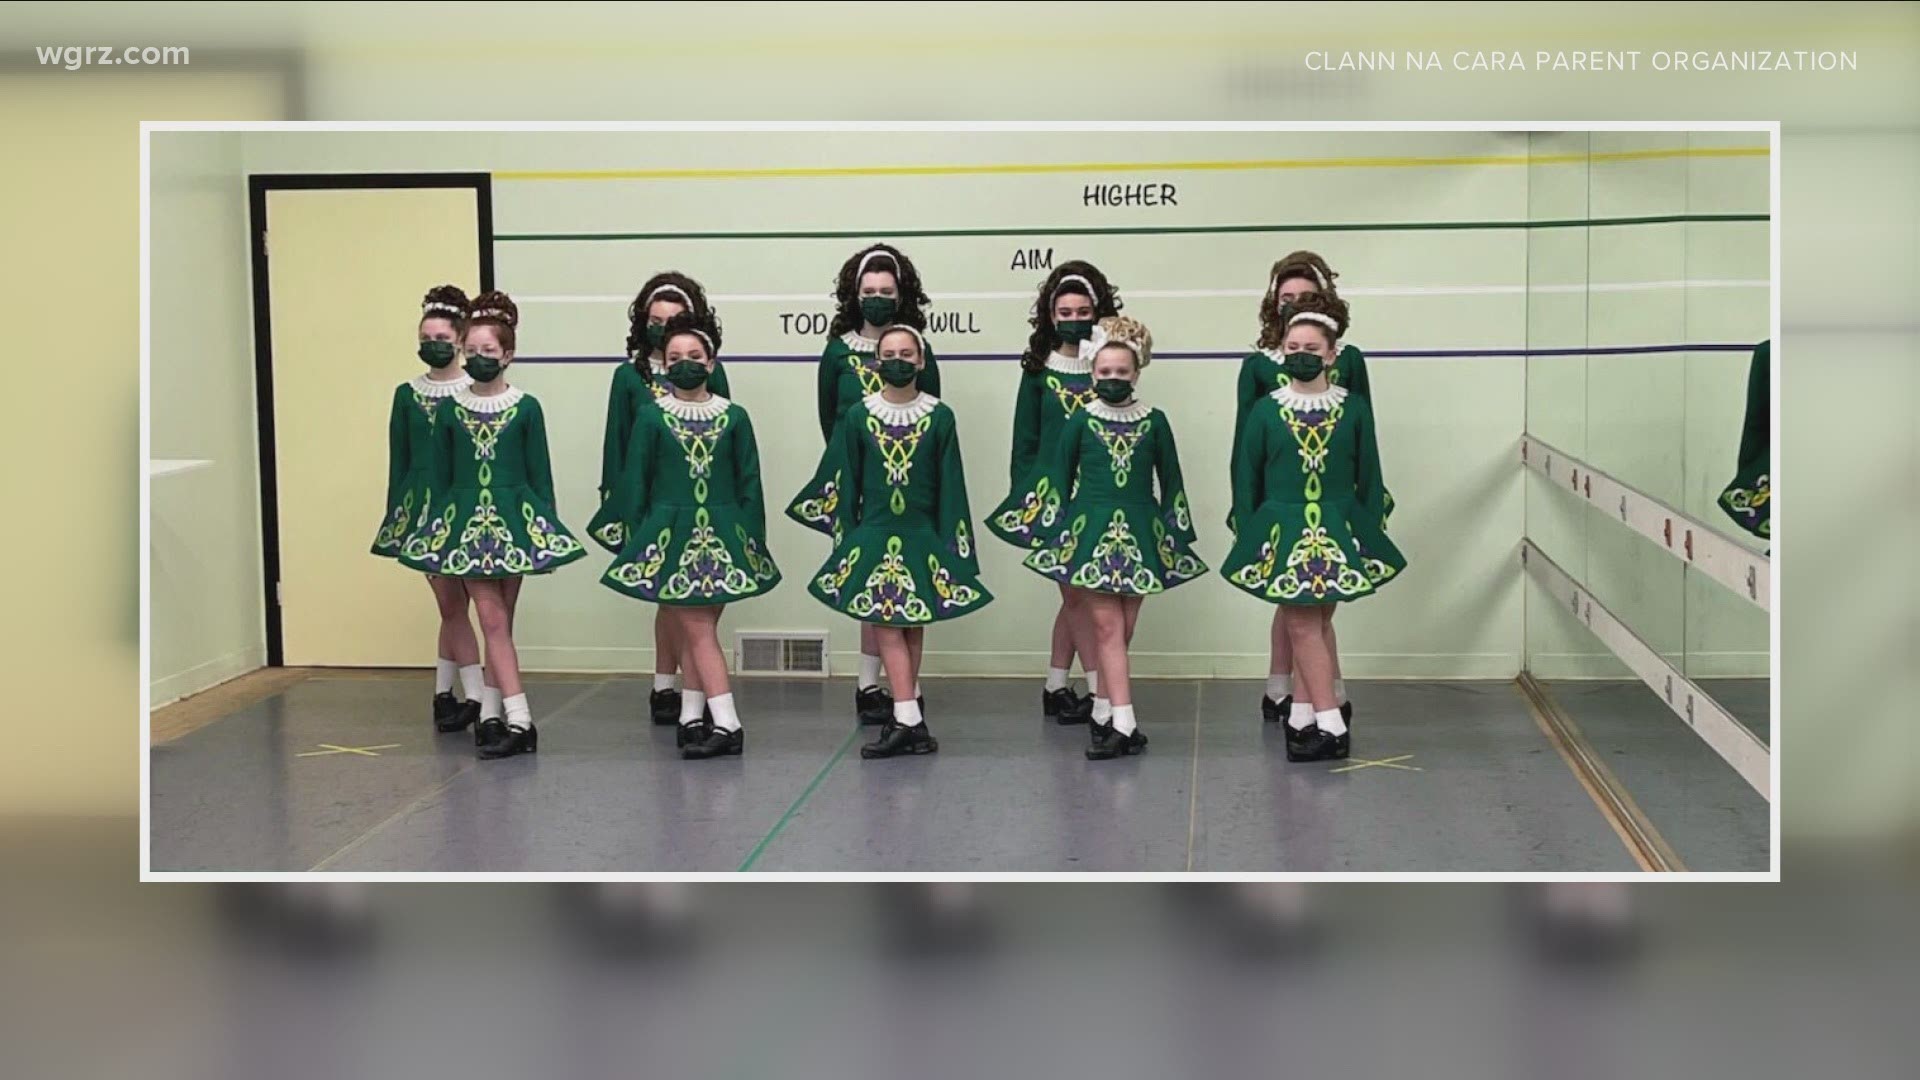 Irish dancers in WNY prepare to take the (virtual) stage for St. Patrick's Day